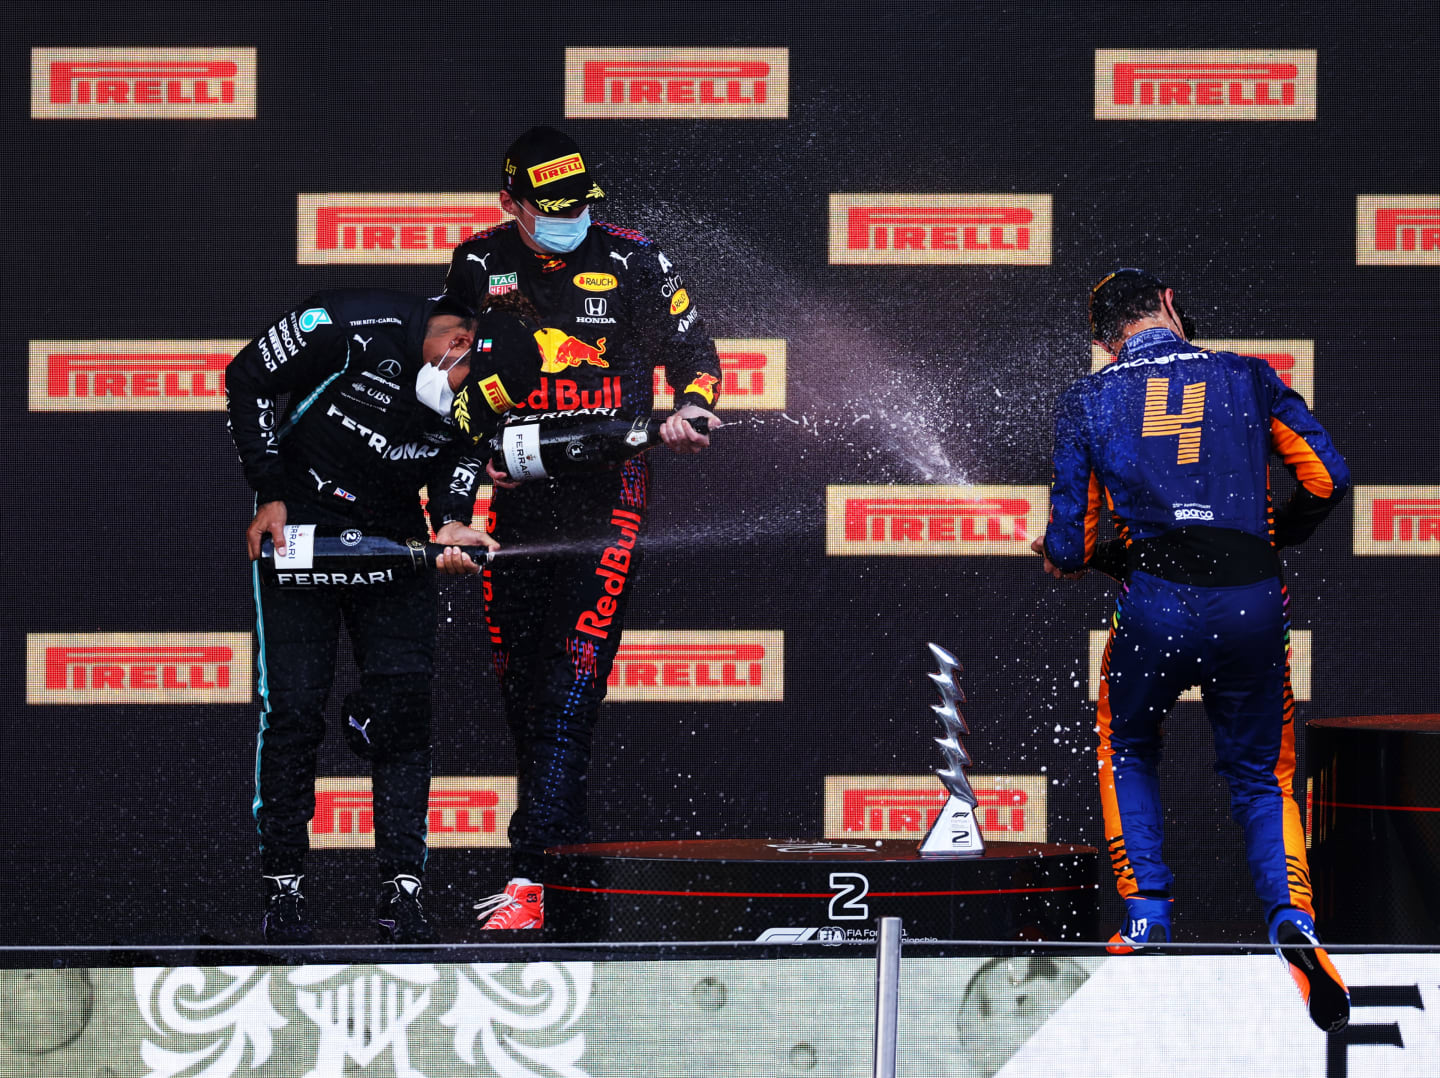 IMOLA, ITALY - APRIL 18: Second placed Lewis Hamilton of Great Britain and Mercedes GP, race winner Max Verstappen of Netherlands and Red Bull Racing and third placed Lando Norris of Great Britain and McLaren F1 celebrate with sparkling wine on the podium during the F1 Grand Prix of Emilia Romagna at Autodromo Enzo e Dino Ferrari on April 18, 2021 in Imola, Italy. (Photo by Lars Baron/Getty Images)